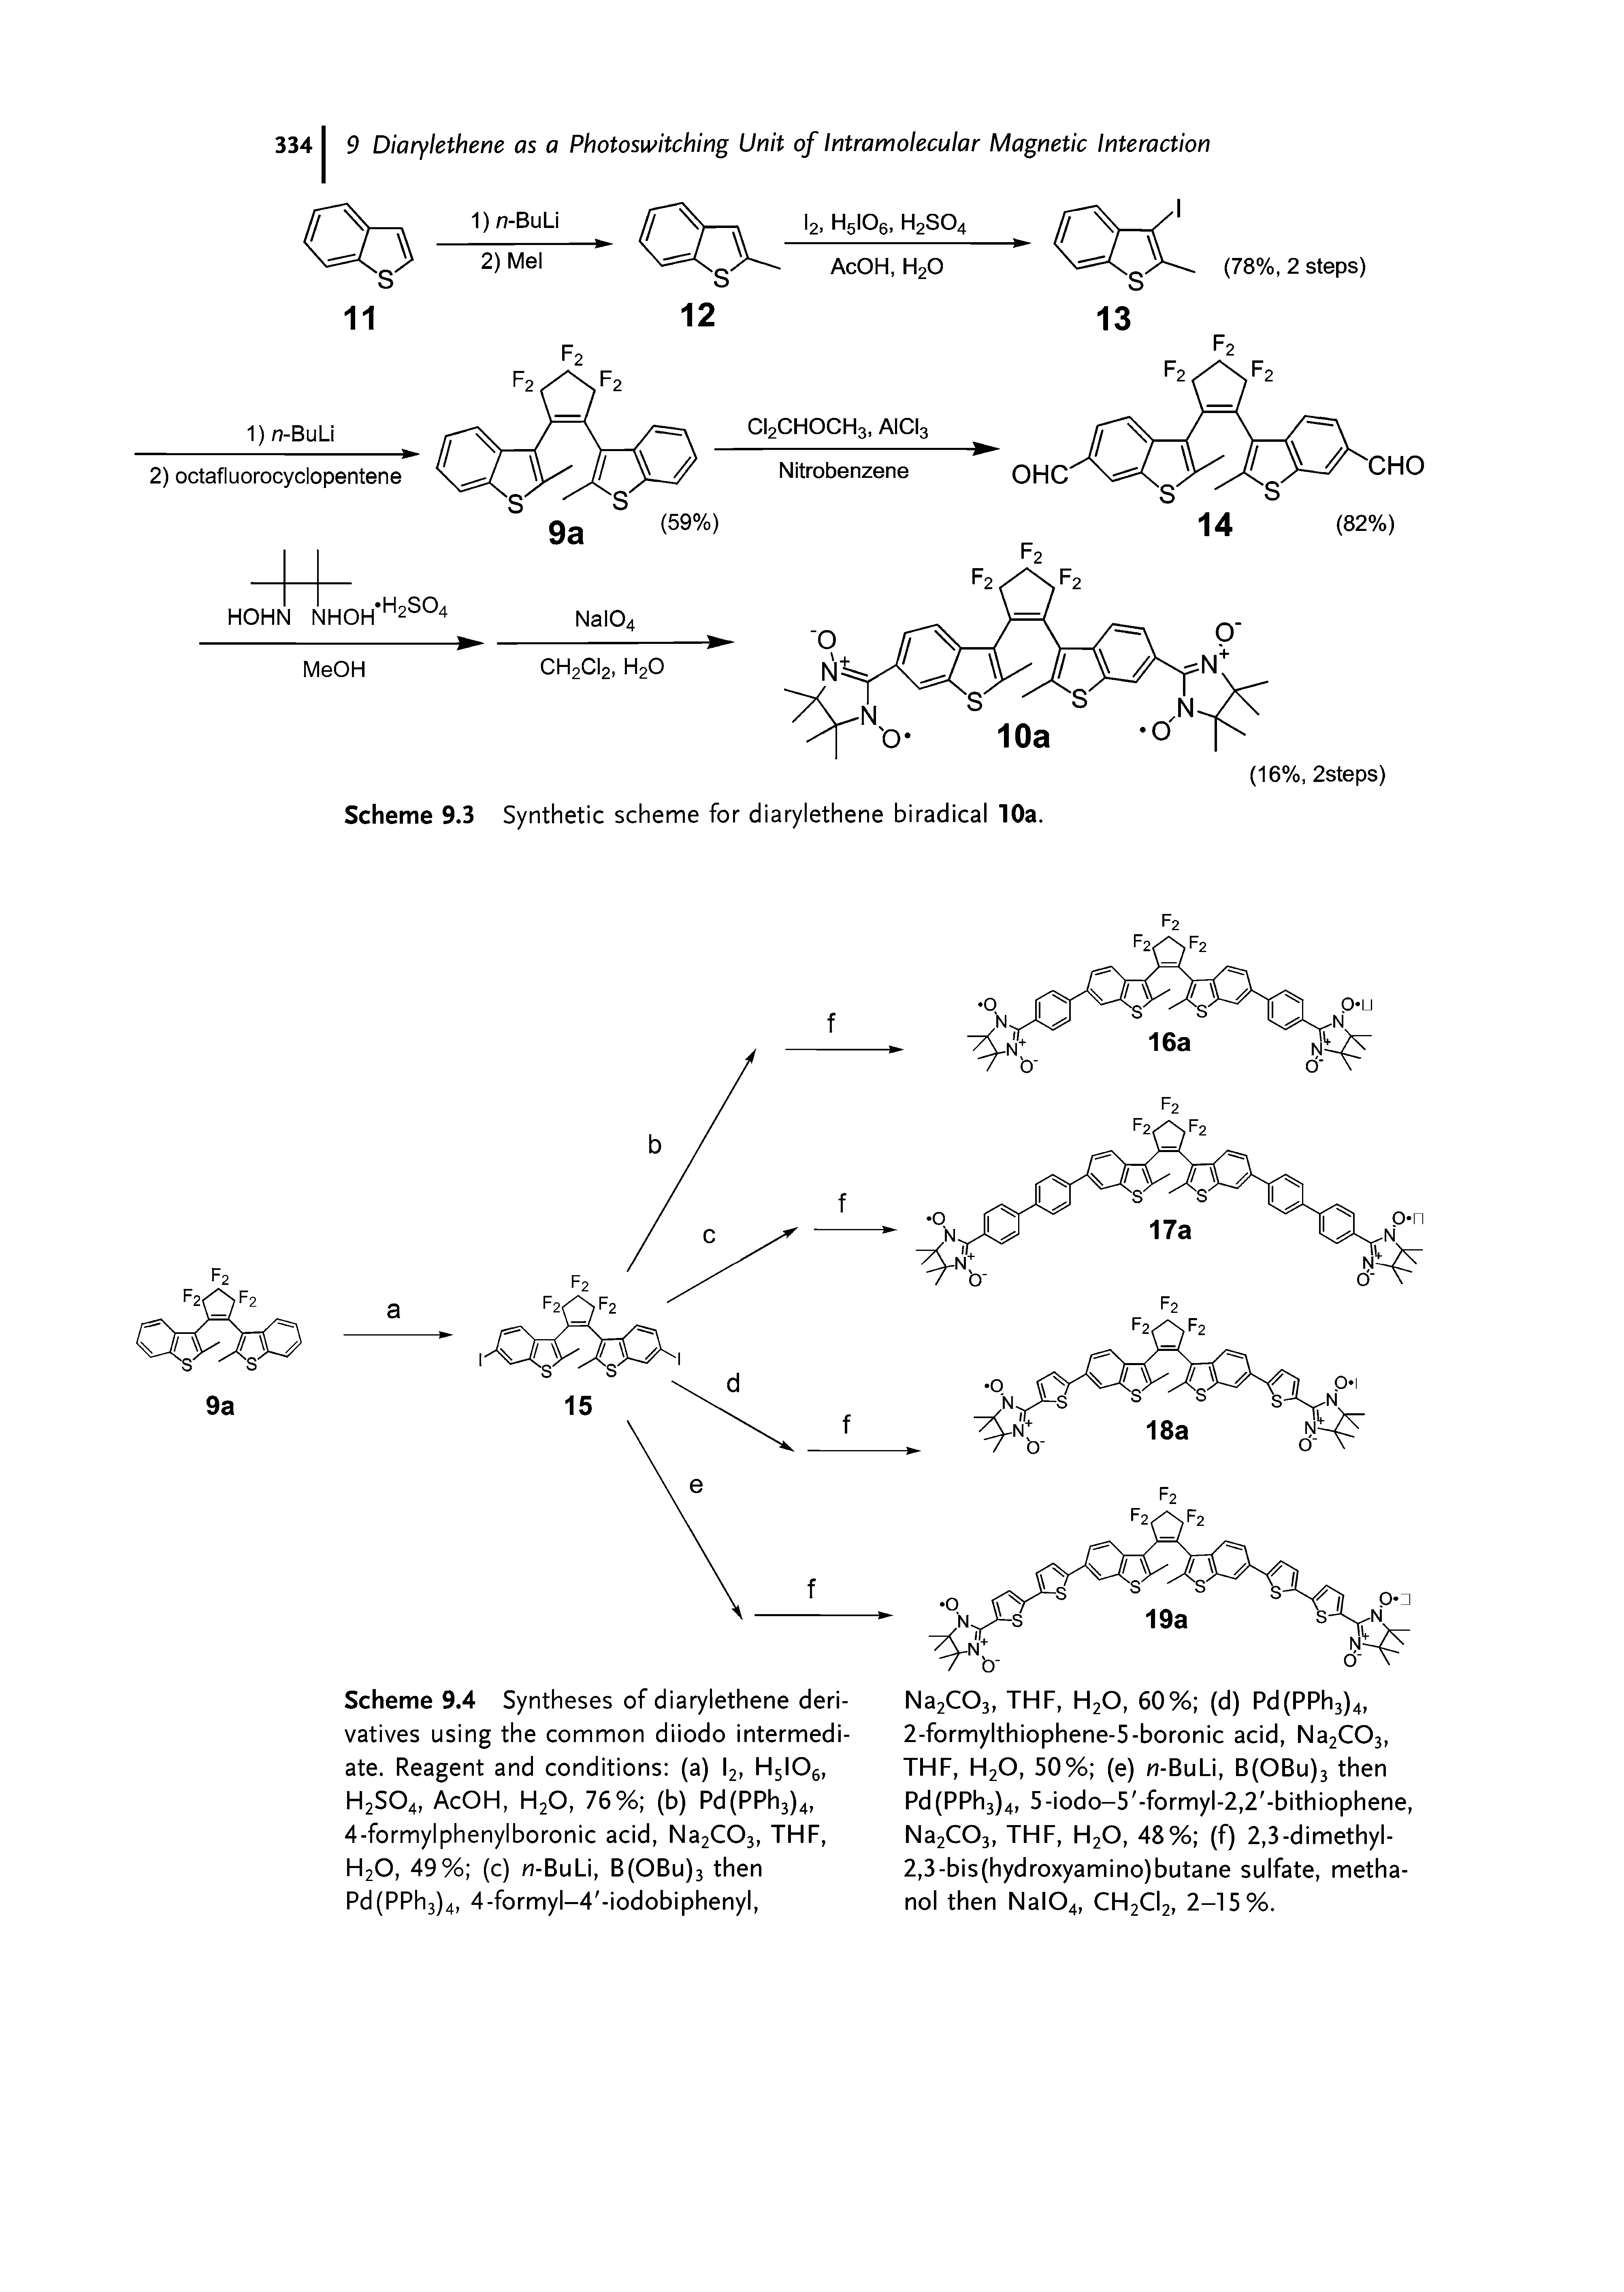 Scheme 9.4 Syntheses of diarylethene derivatives using the common diiodo intermediate. Reagent and conditions (a) l2, H5IOe, H2S04, AcOH, H20, 76% (b) Pd(PPh3)4, 4-formylphenylboronic acid, Na2C03, THF, H20, 49% (c) fl-BuLi, B(OBu)3 then Pd(PPh3)4, 4-formyl-4 -iodobiphenyl,...